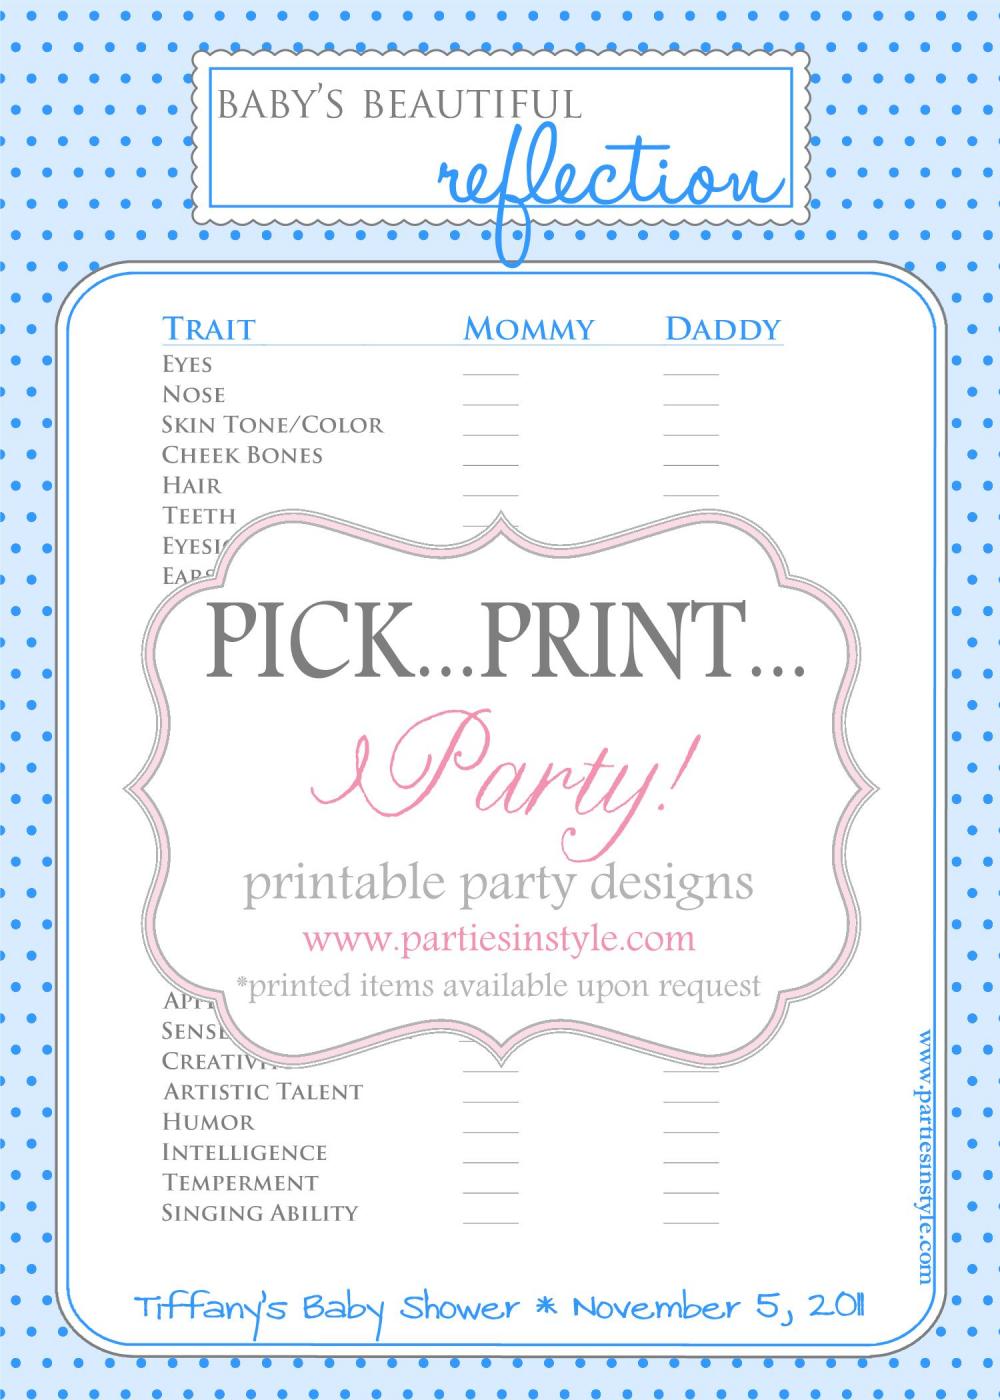 Baby Shower Game - Baby's Beautiful Reflection - Printable Diy